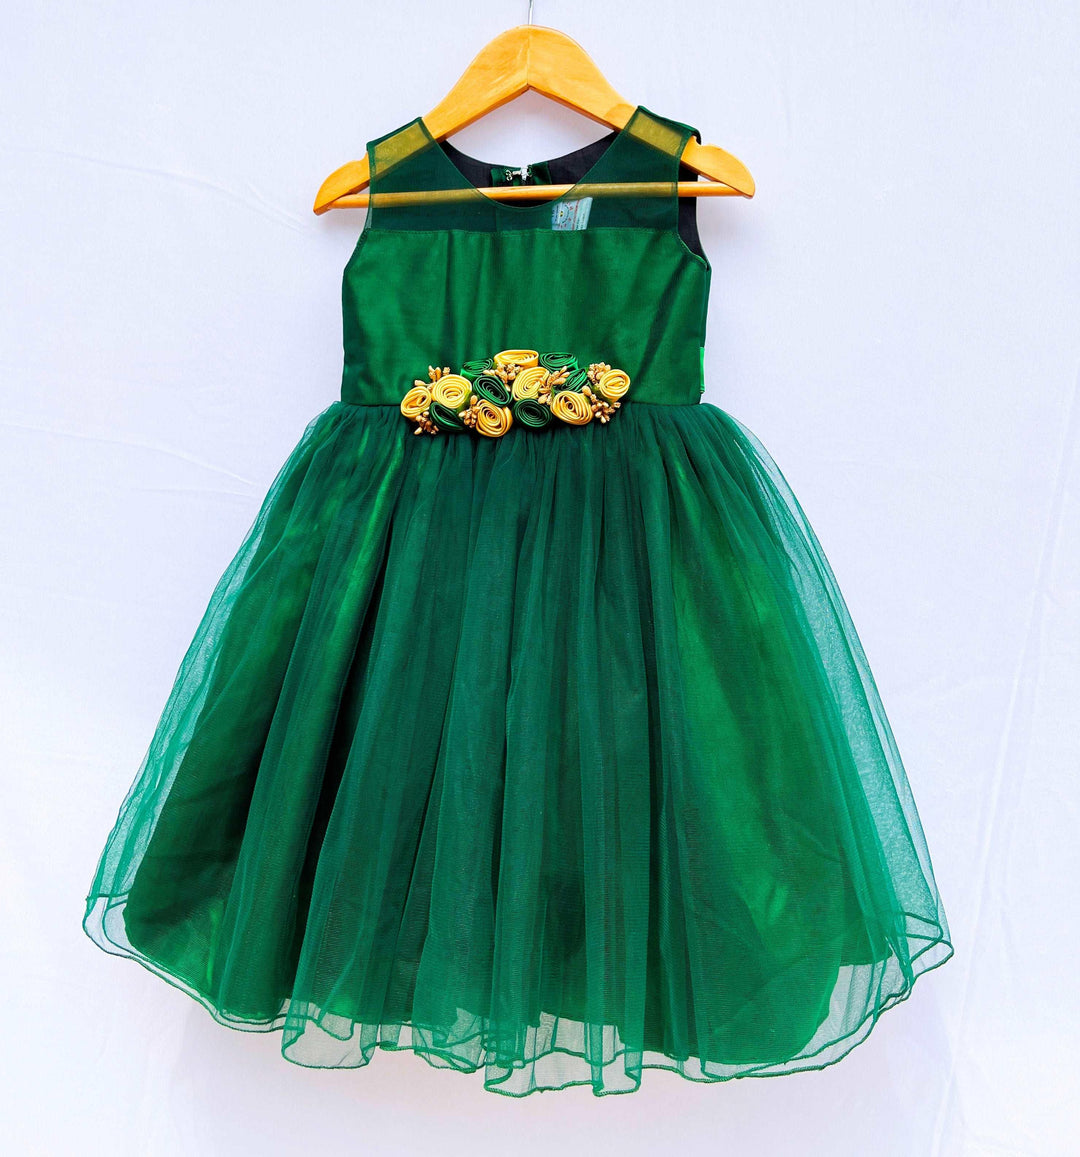 Bottle Green Knee-Length Flower Frock
Fabric:  Bottlle Green shade  mono net with green and golden mix flowers on the centre portion.  Neck is designed in Transparent pattern. Beautifully designed outfi